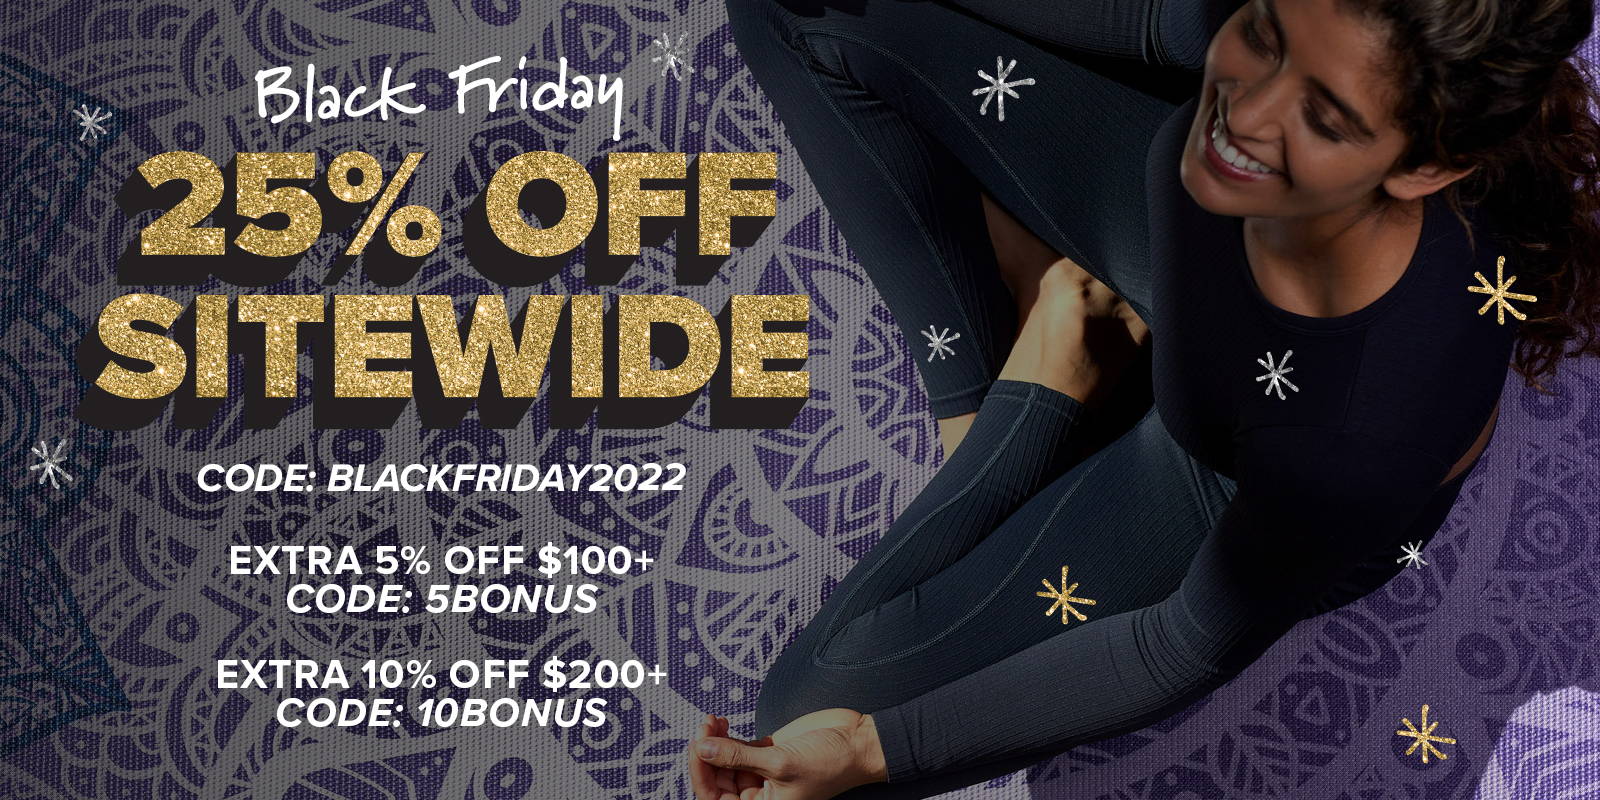 Gaiam - Take 25% Off with Coupon